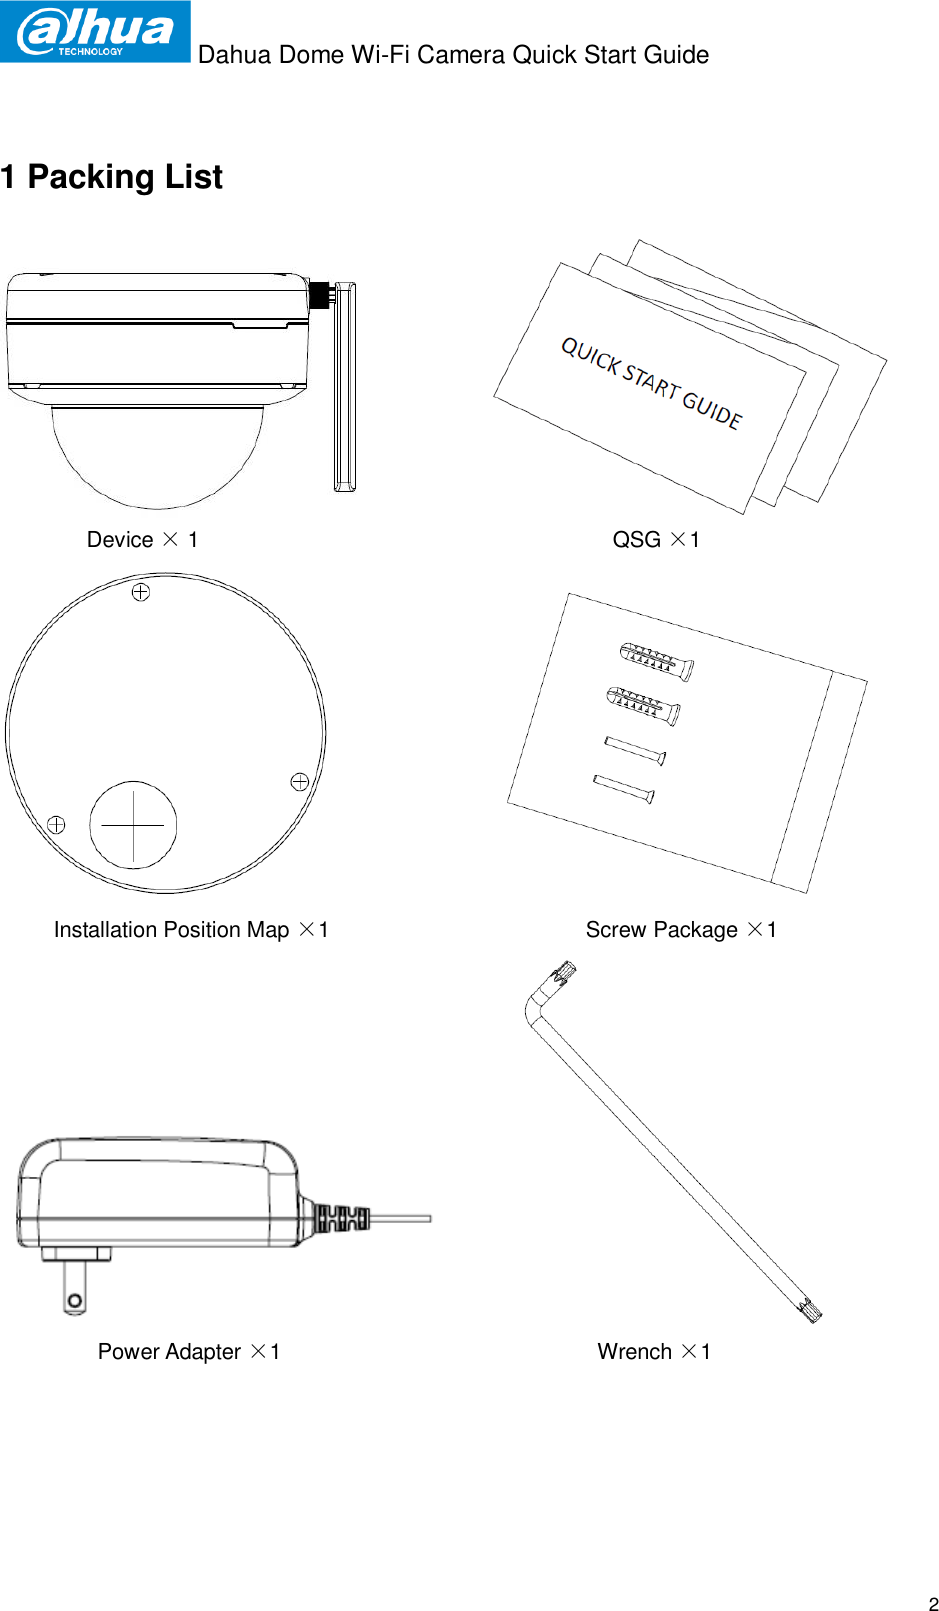  Dahua Dome Wi-Fi Camera Quick Start Guide  2 1 Packing List                               Device × 1                                                                    QSG ×1                      Installation Position Map ×1                                          Screw Package ×1          Power Adapter ×1                                                    Wrench ×1 